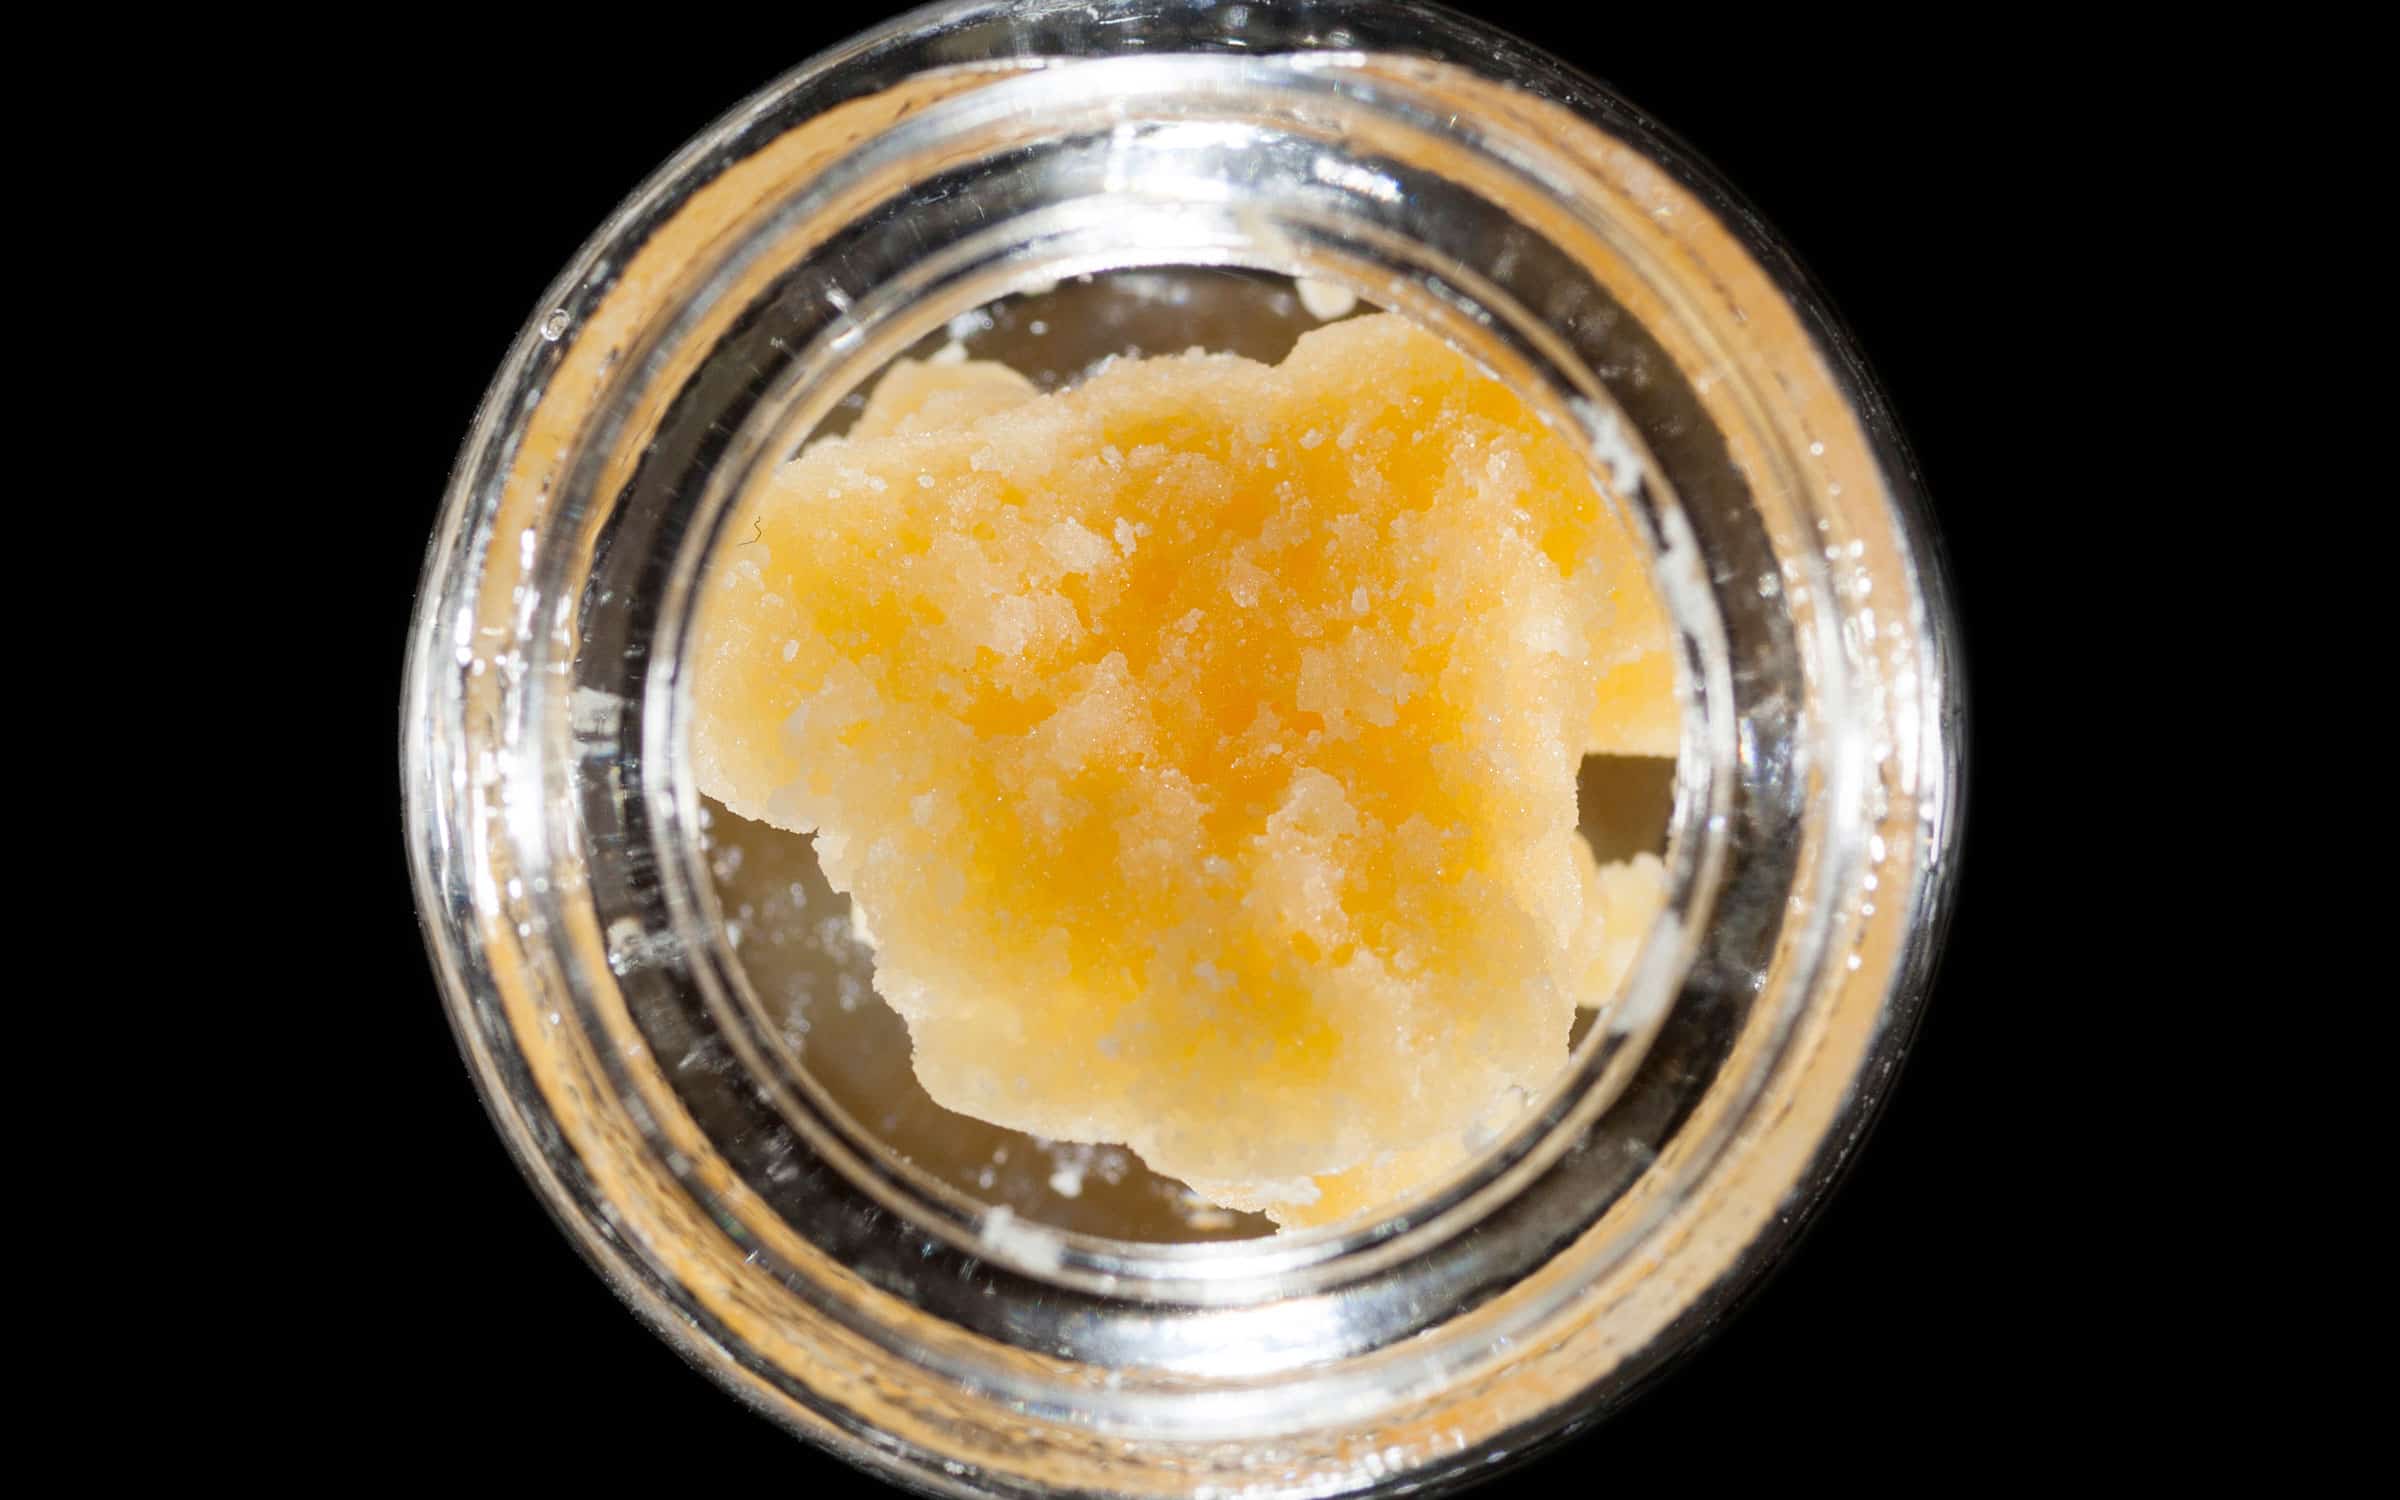 ch14_strawberry_banana_sugar_live_resin_new_amsterdam_with_golden_nugget